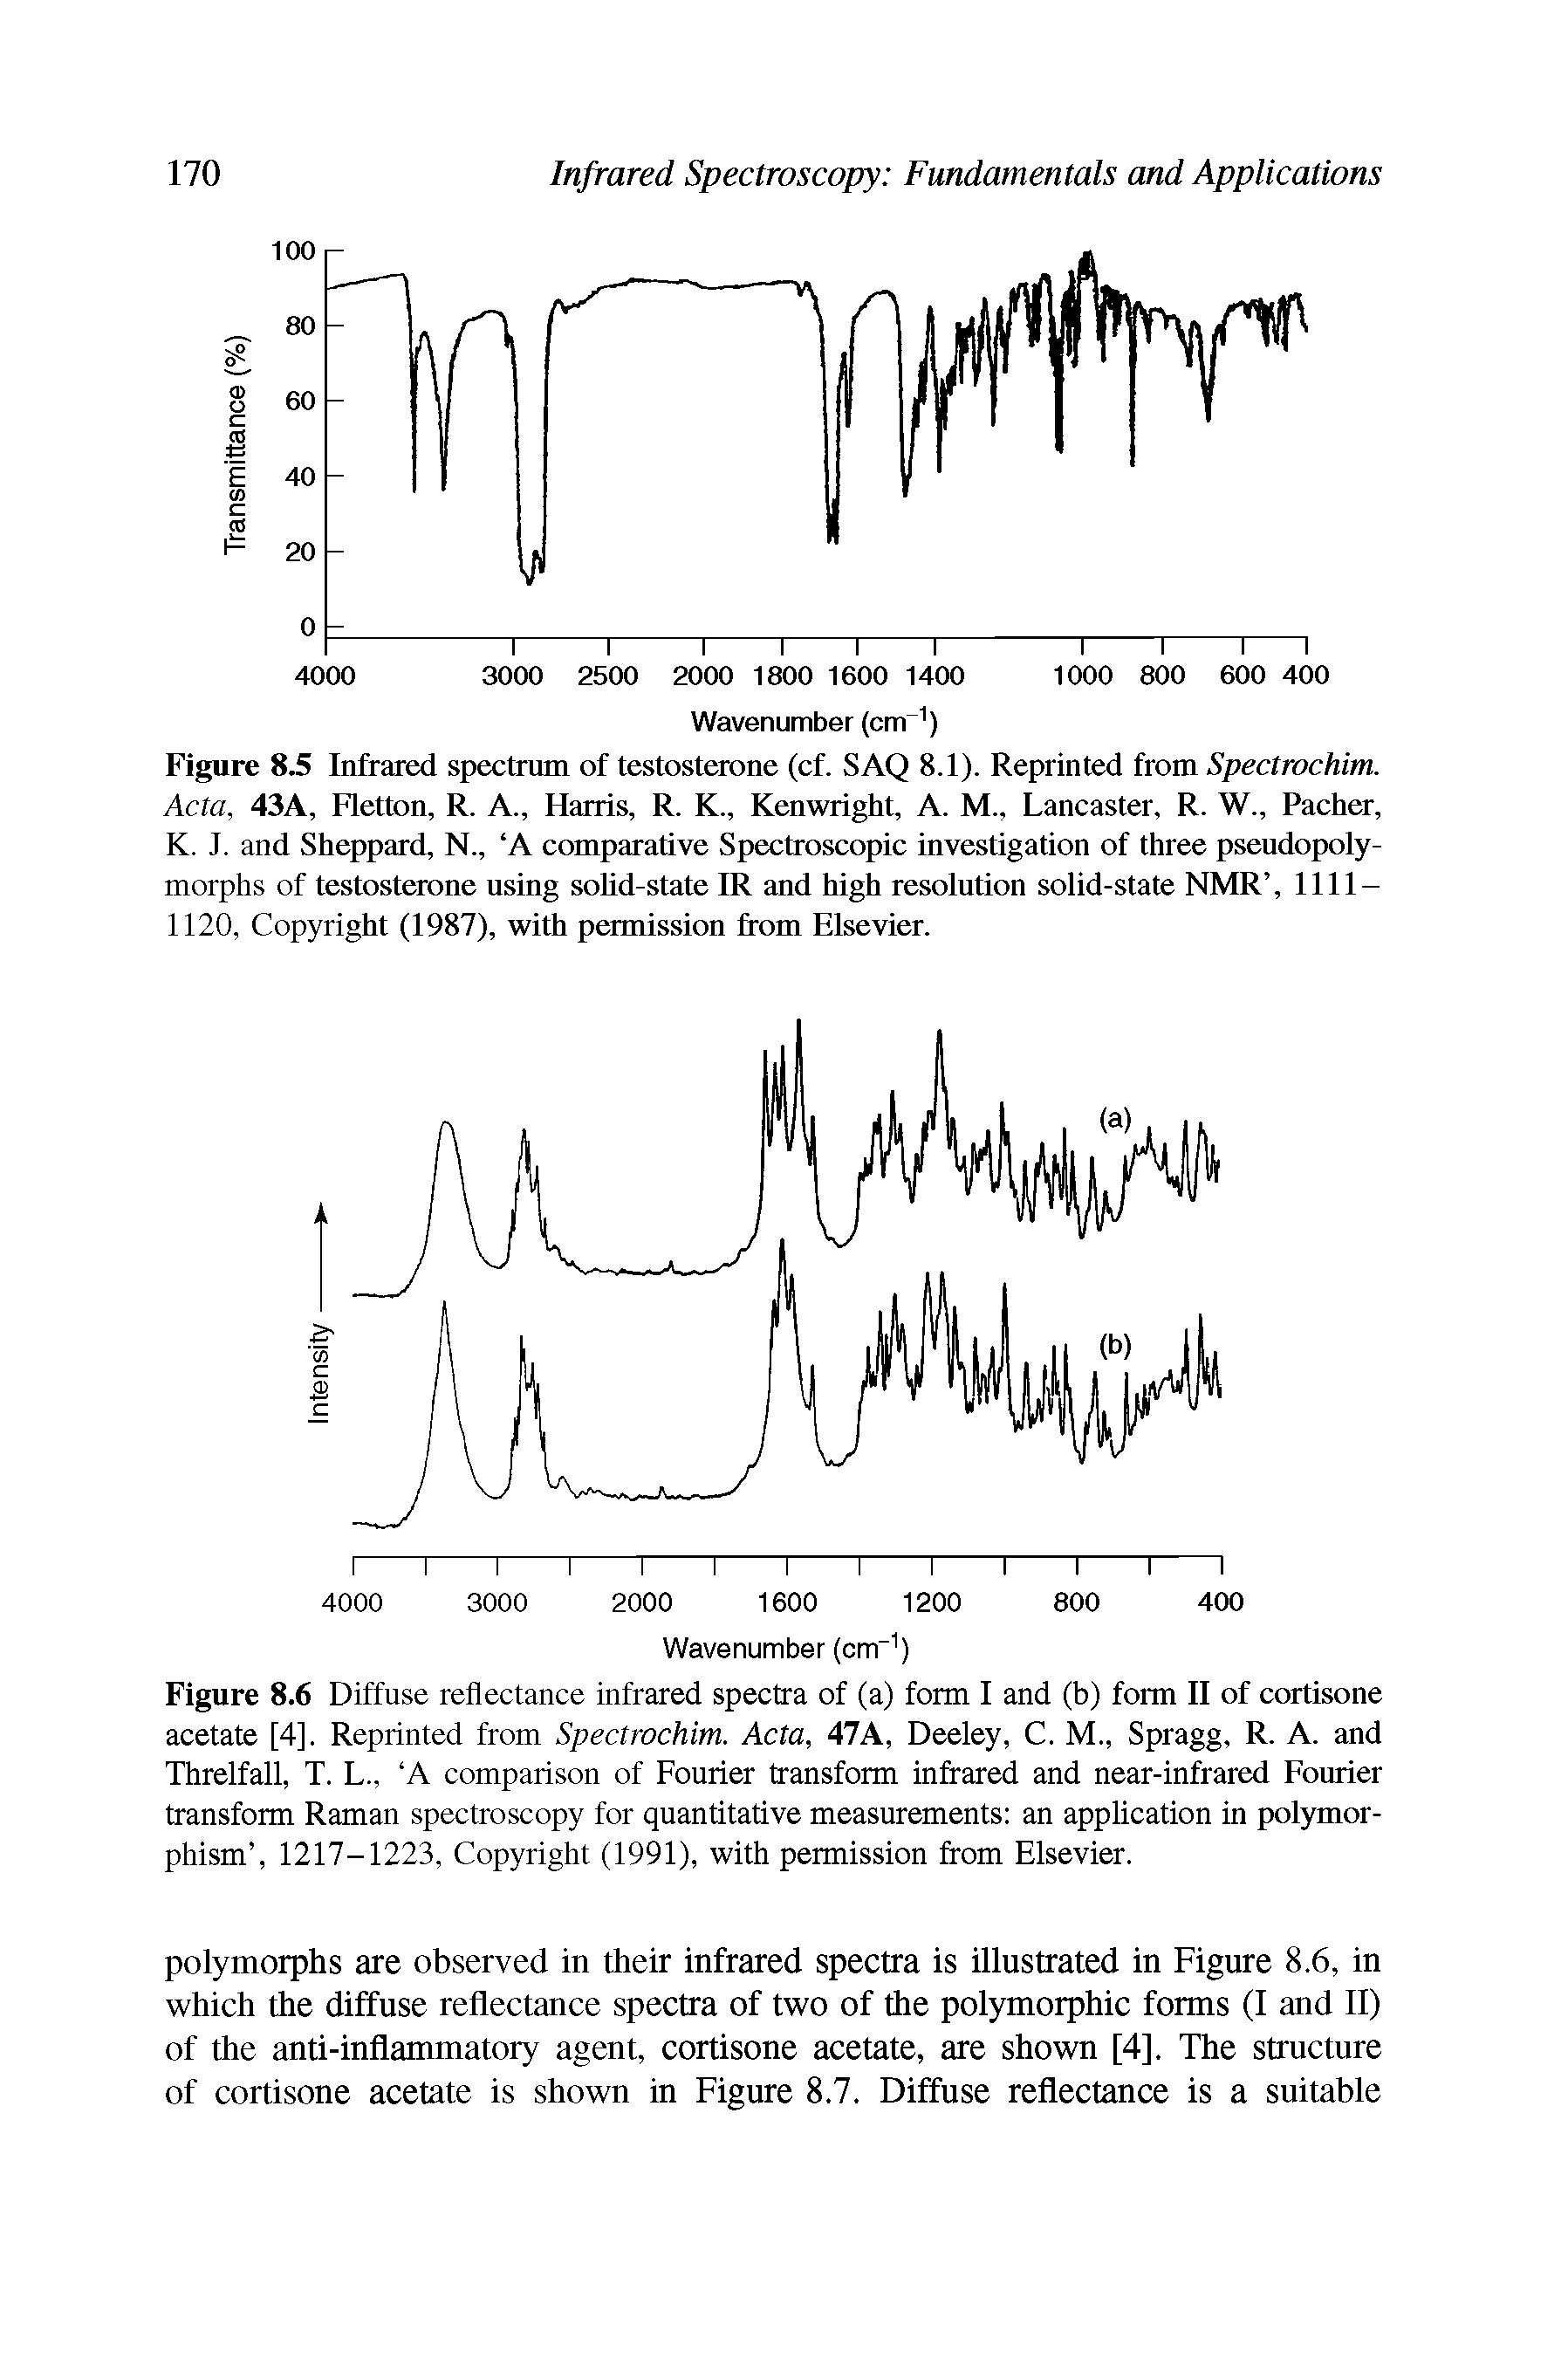 Figure 8.6 Diffuse reflectance infrared spectra of (a) form I and (b) form II of cortisone acetate [4]. Reprinted from Spectrochim. Acta, 47A, Deeley, C. M., Spragg, R. A. and Threlfall, T. L., A comparison of Fourier transform infrared and near-infrared Fourier transform Raman spectroscopy for quantitative measurements an application in polymorphism , 1217-1223, Copyright (1991), with permission from Elsevier.